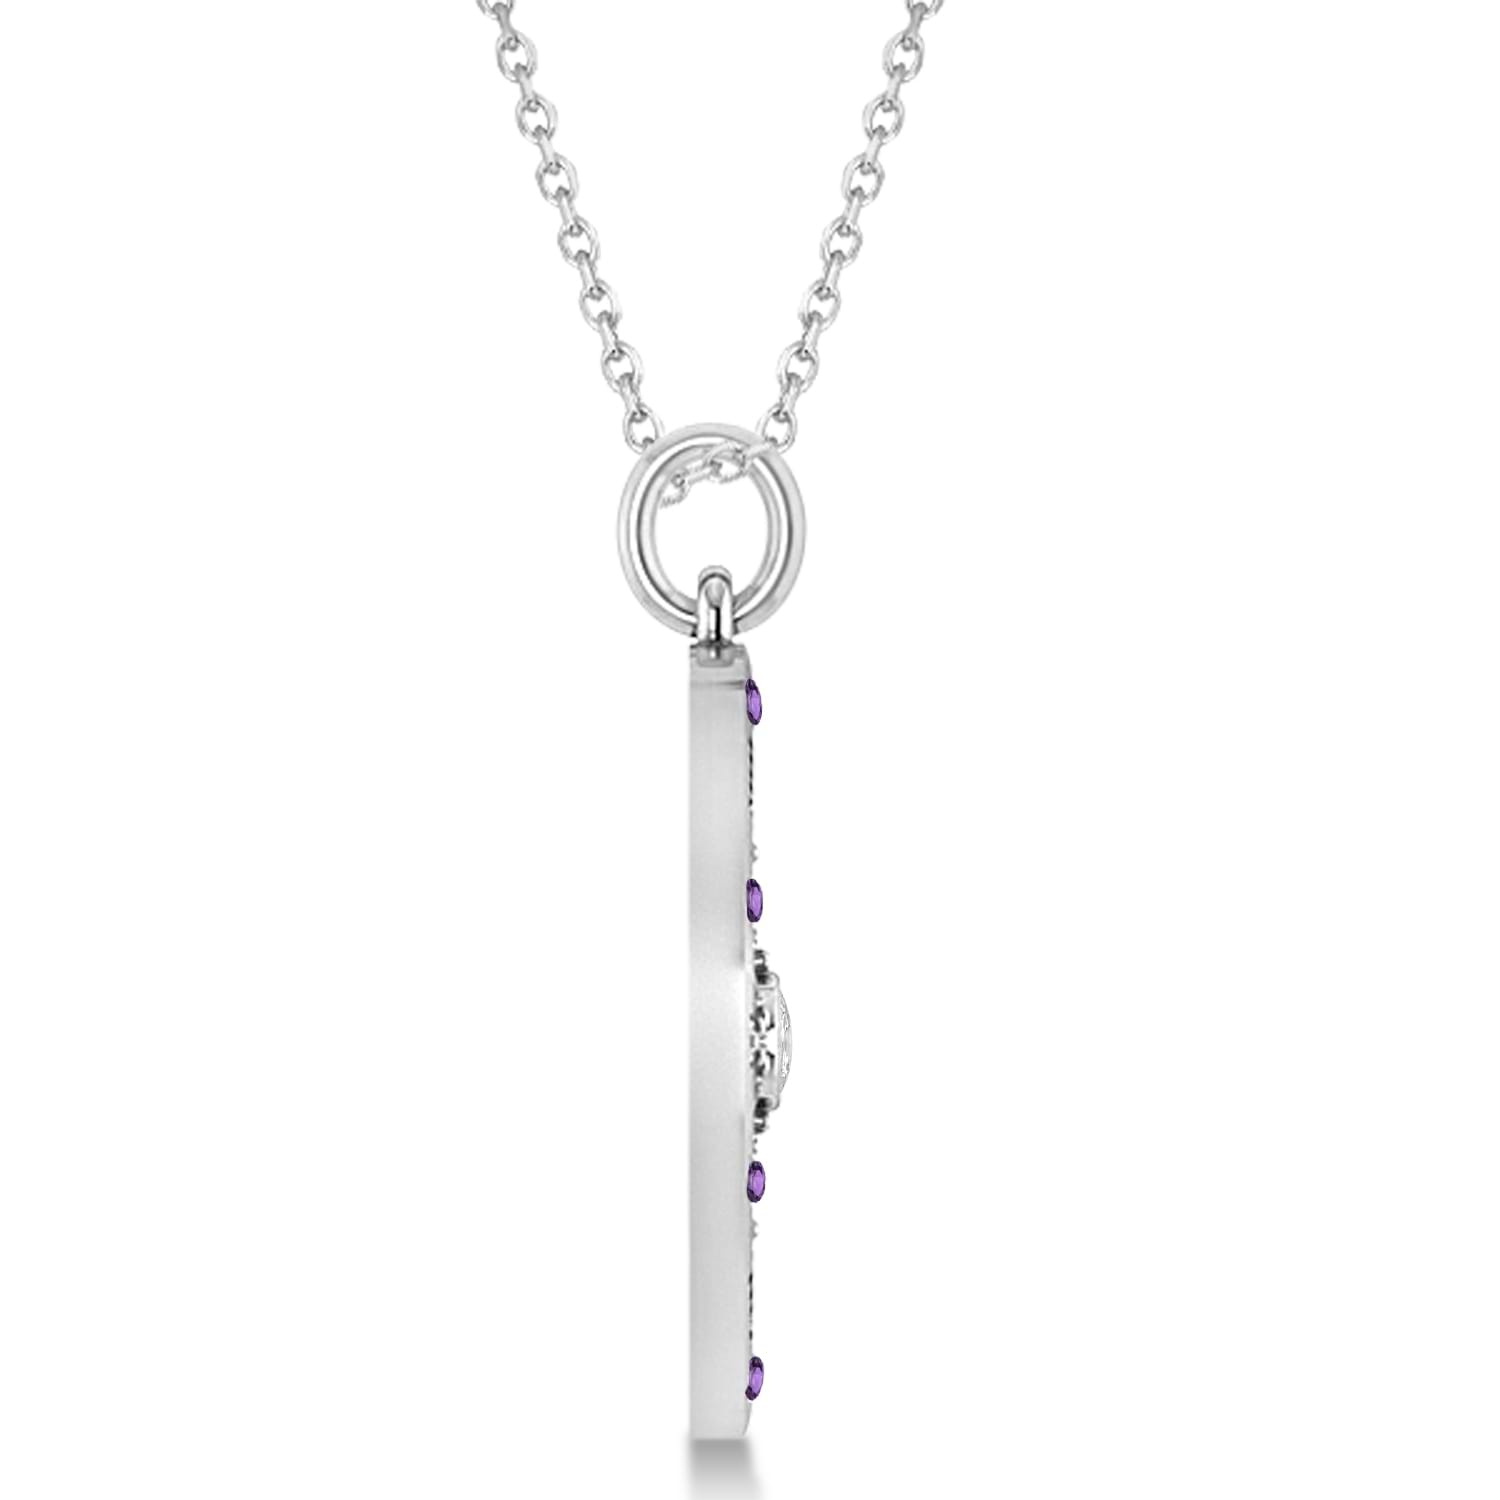 Compass Pendant Amethyst & Diamond Accented 14k White Gold (0.19ct)